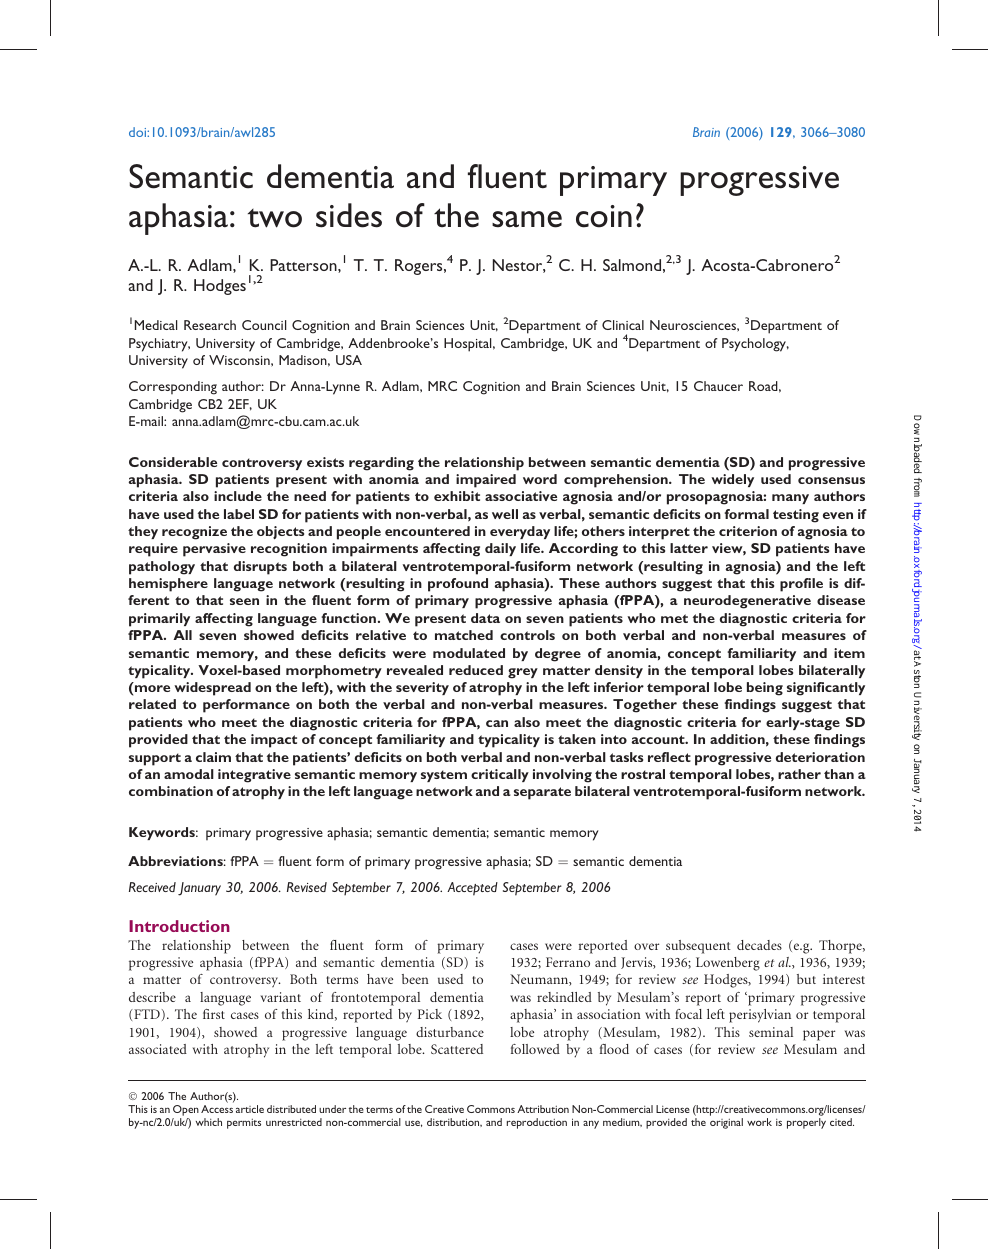 Semantic Dementia And Fluent Primary Progressive Aphasia Two Sides Of The Same Coin Topic Of Research Paper In Clinical Medicine Download Scholarly Article Pdf And Read For Free On Cyberleninka Open